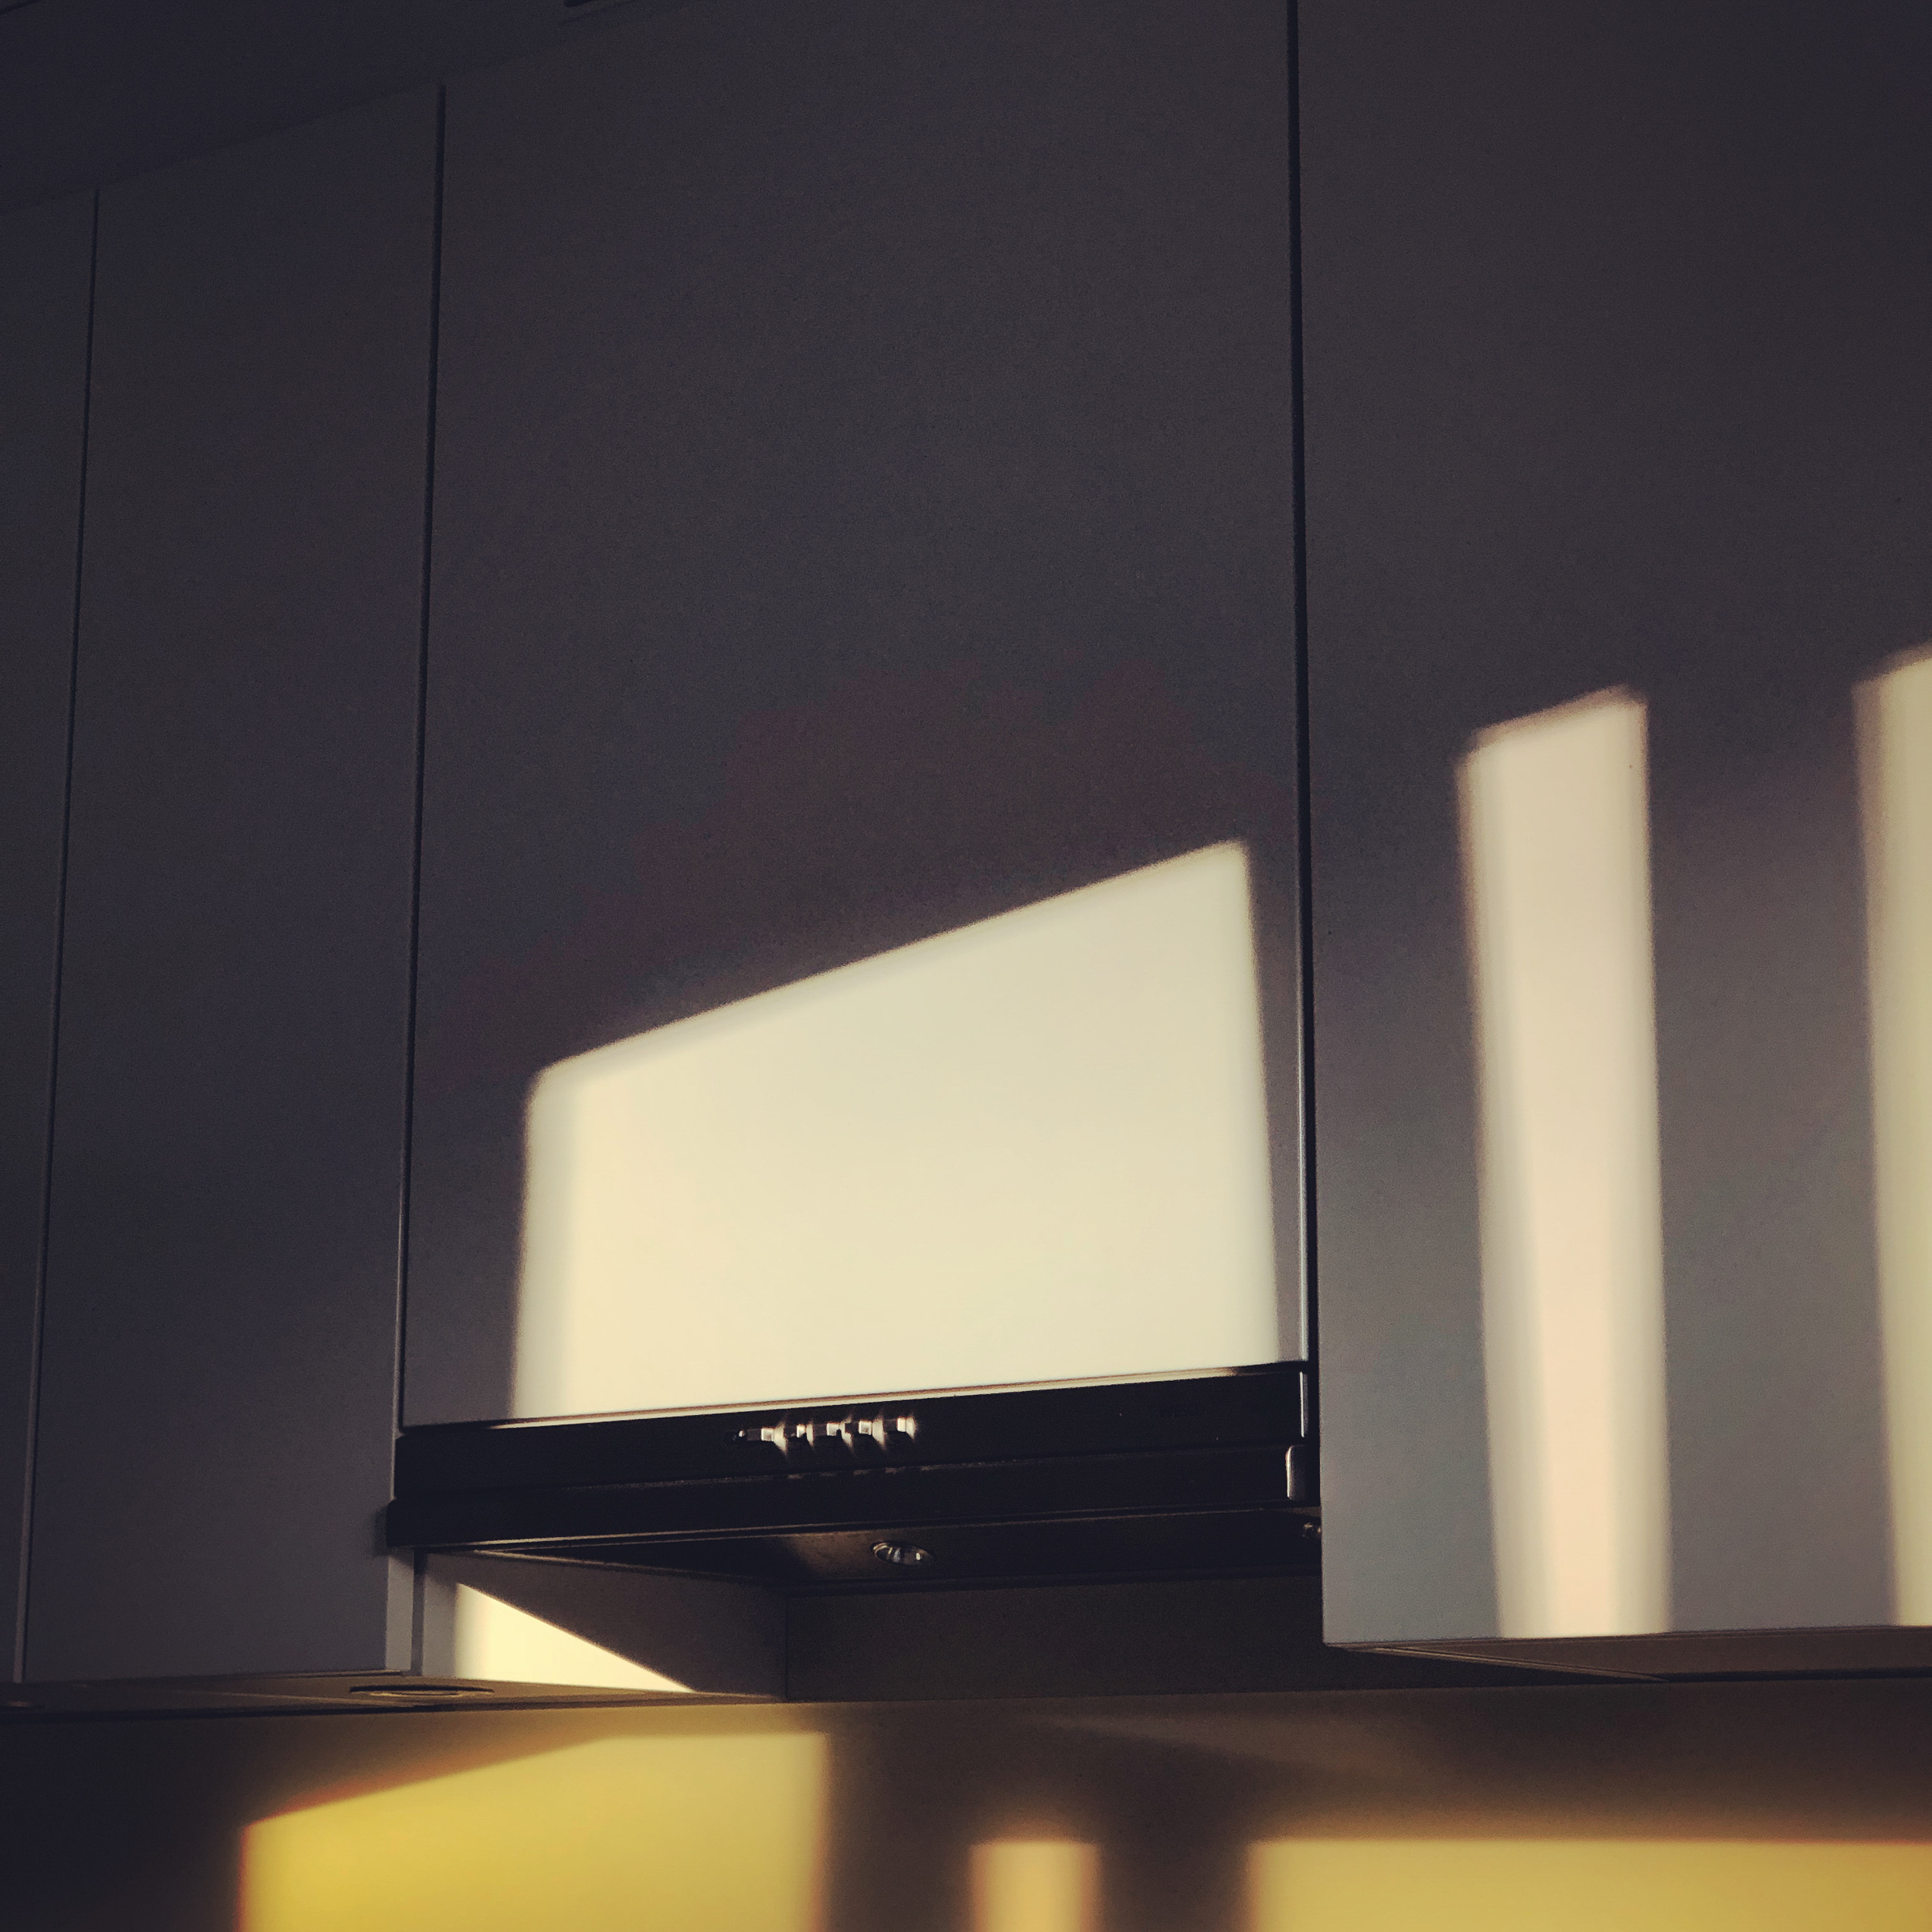 Kitchen abstractions